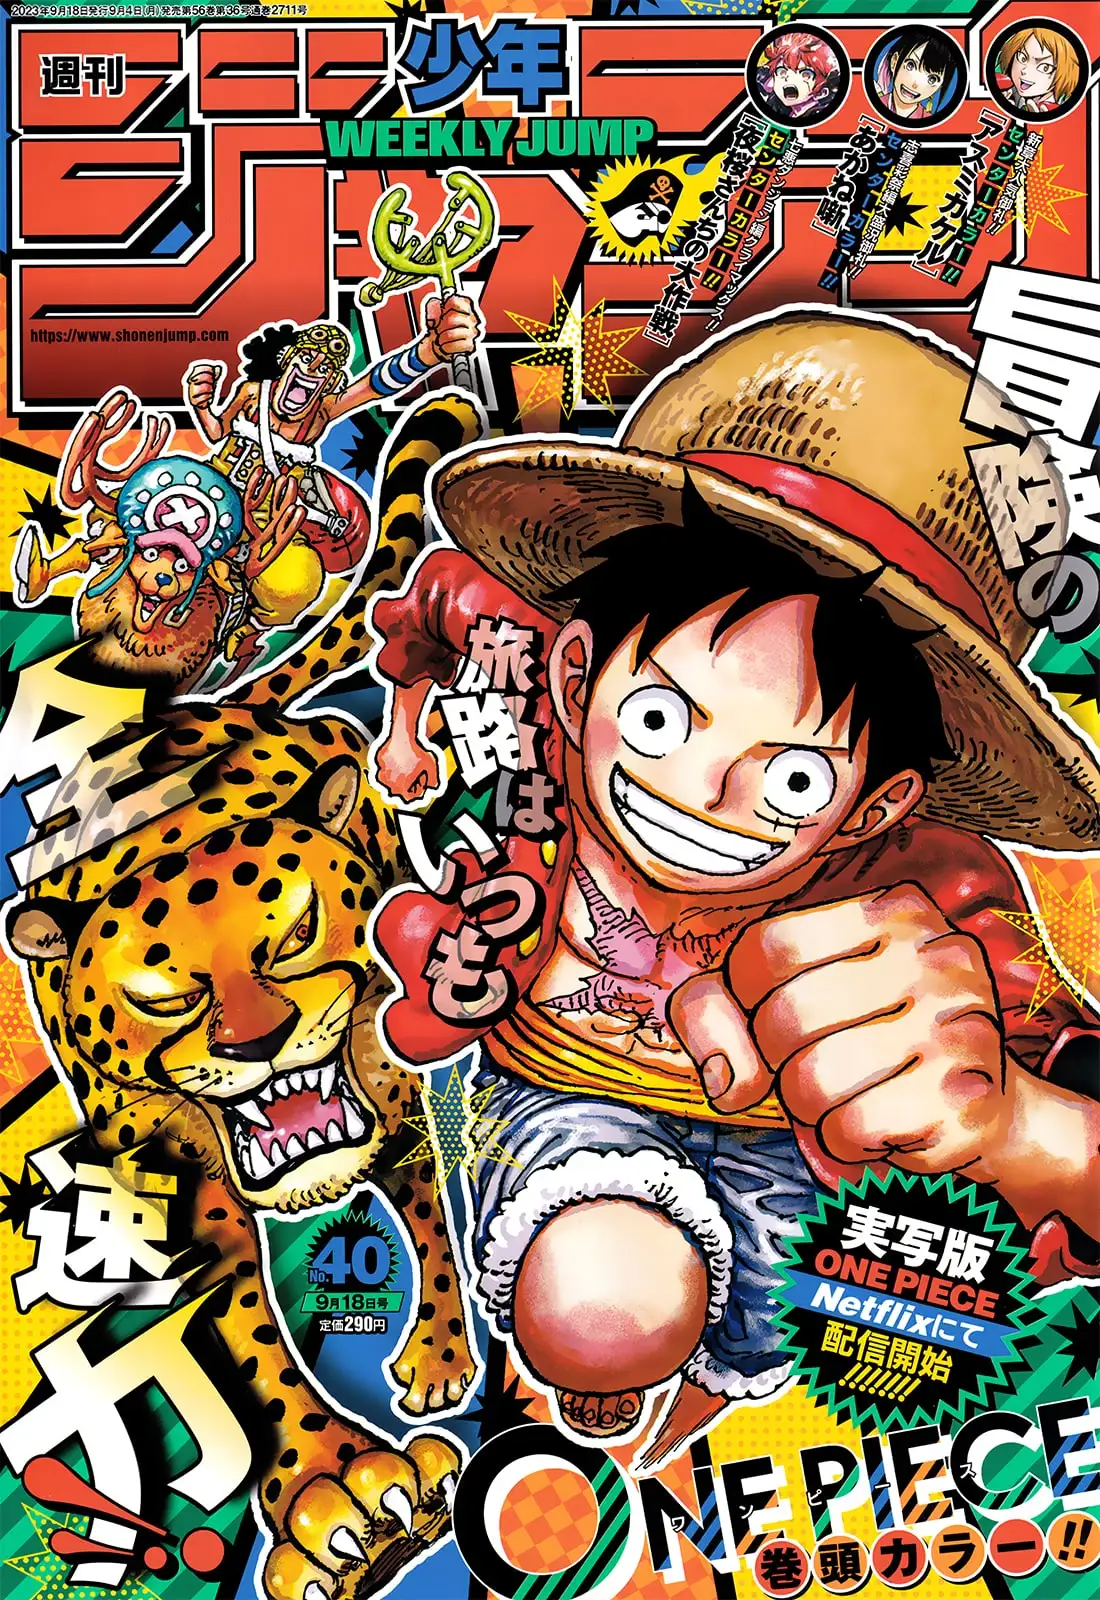 Cover scan 1091 One Piece